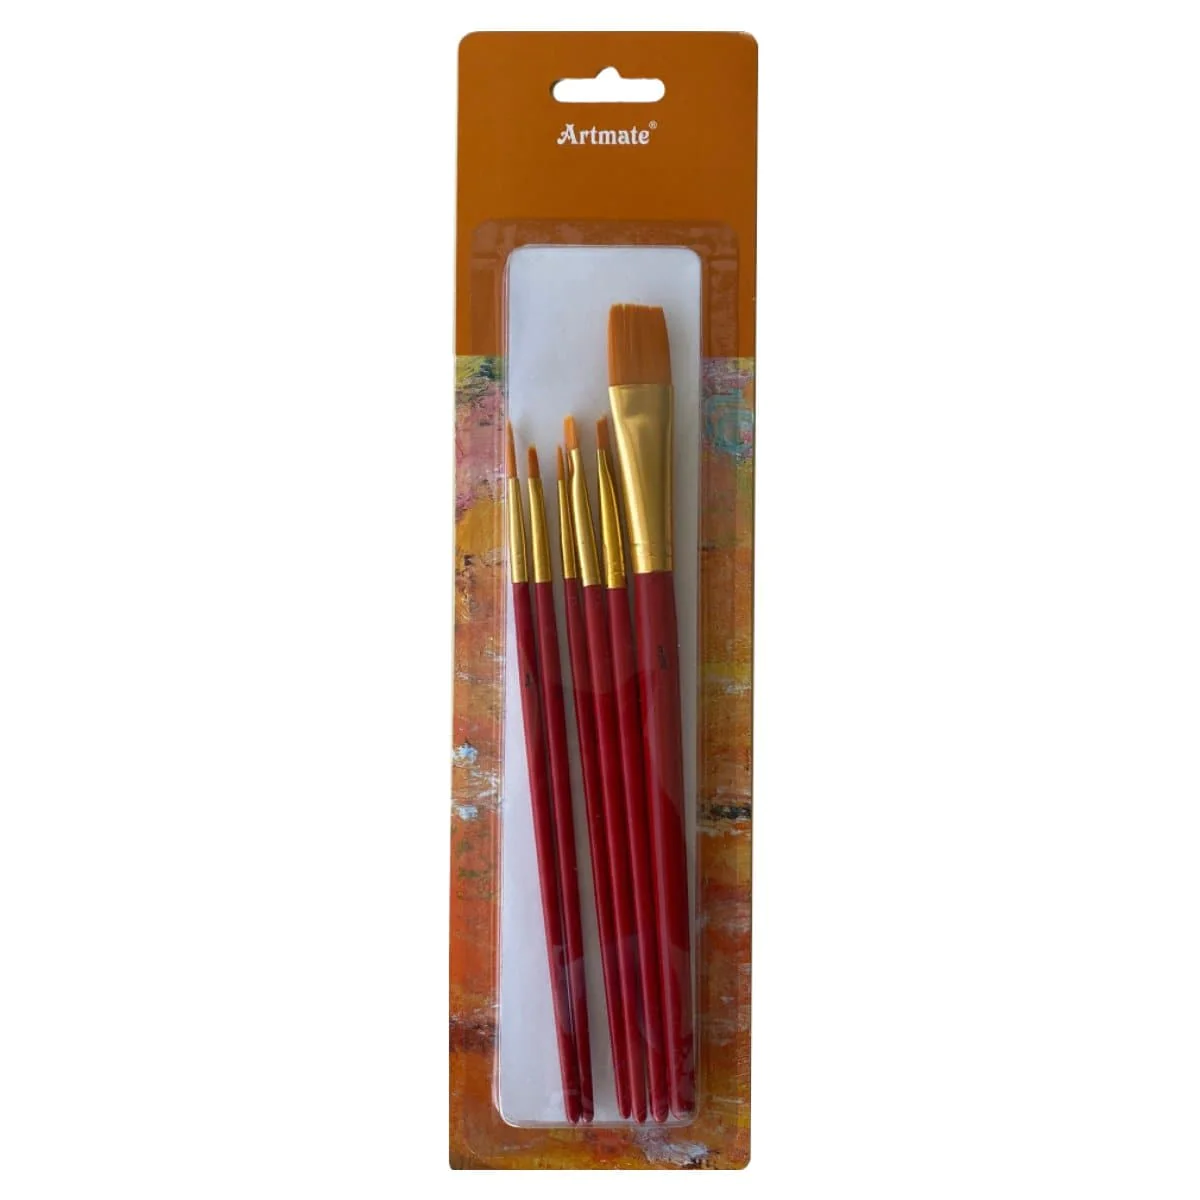 office accessories dubai affordable stationery shops in shopee online stationery store near me biggest stationery shop in dubai